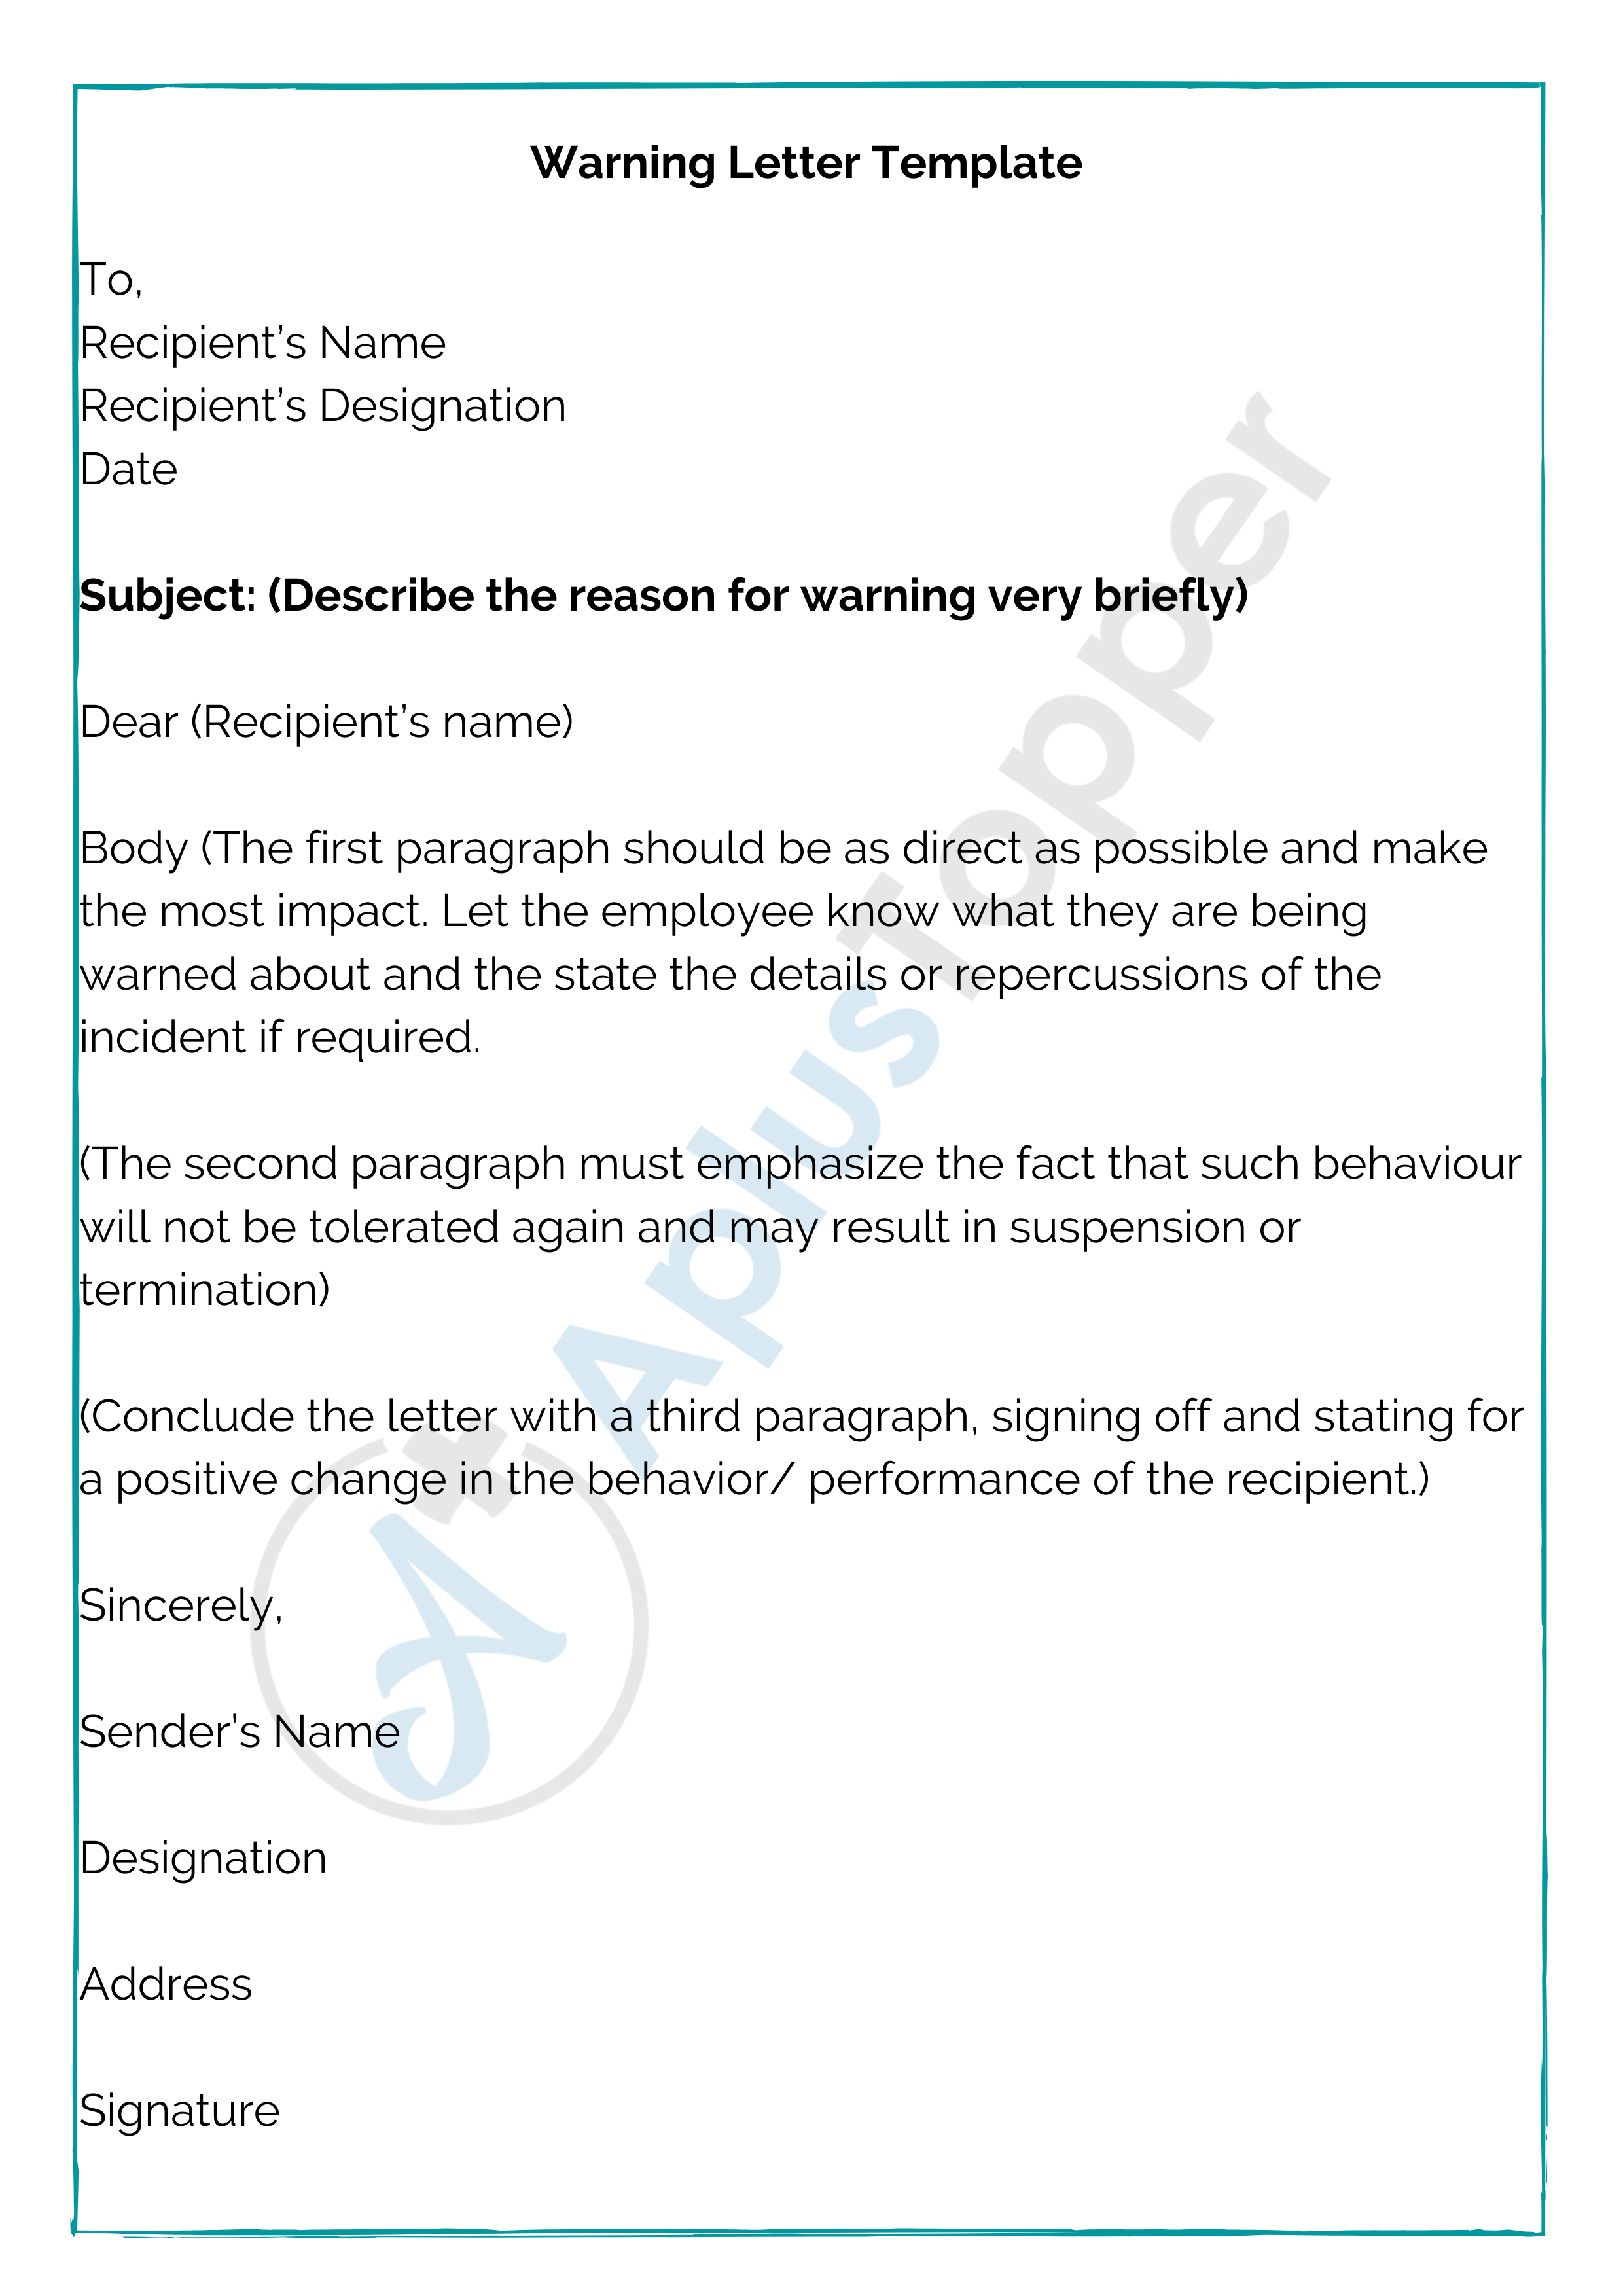 Warning Letter How To Write a Warning Letter?, Template, Samples